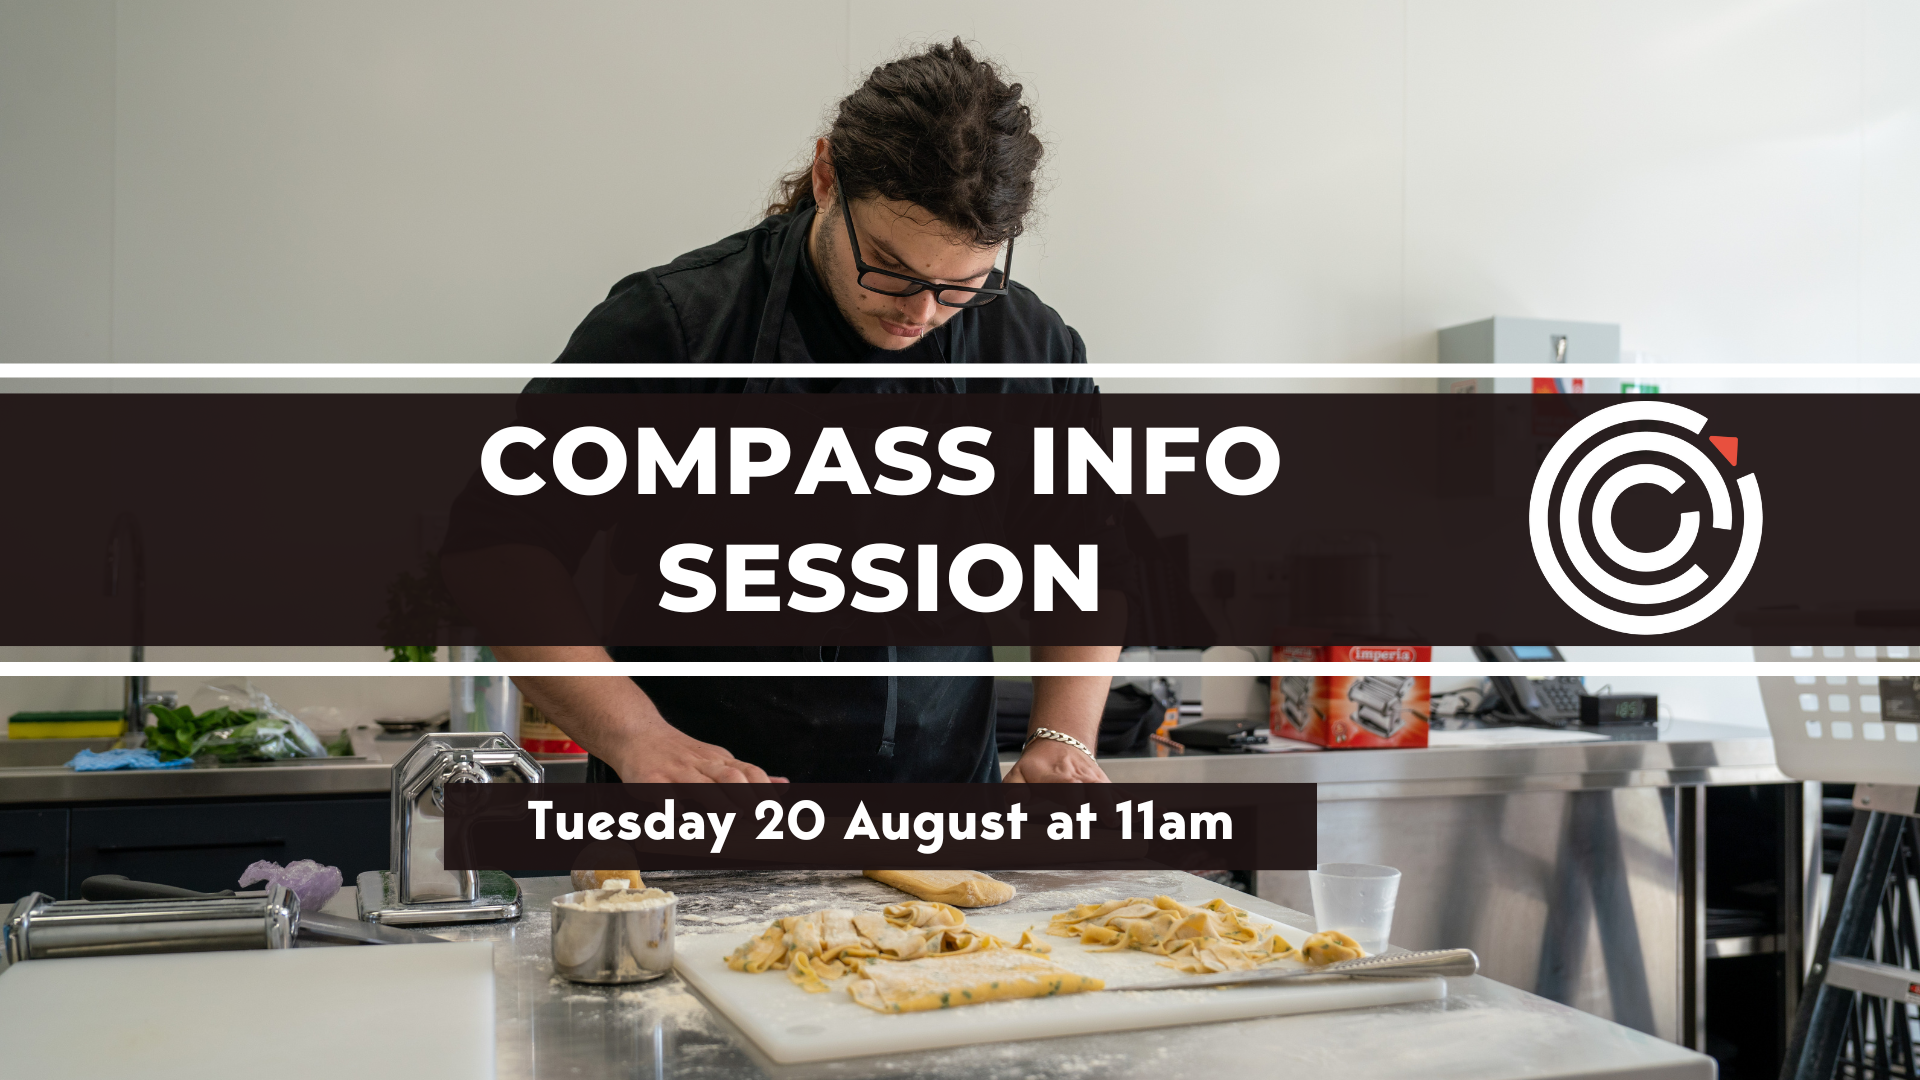 Compass Info Session - Tuesday 20 August 